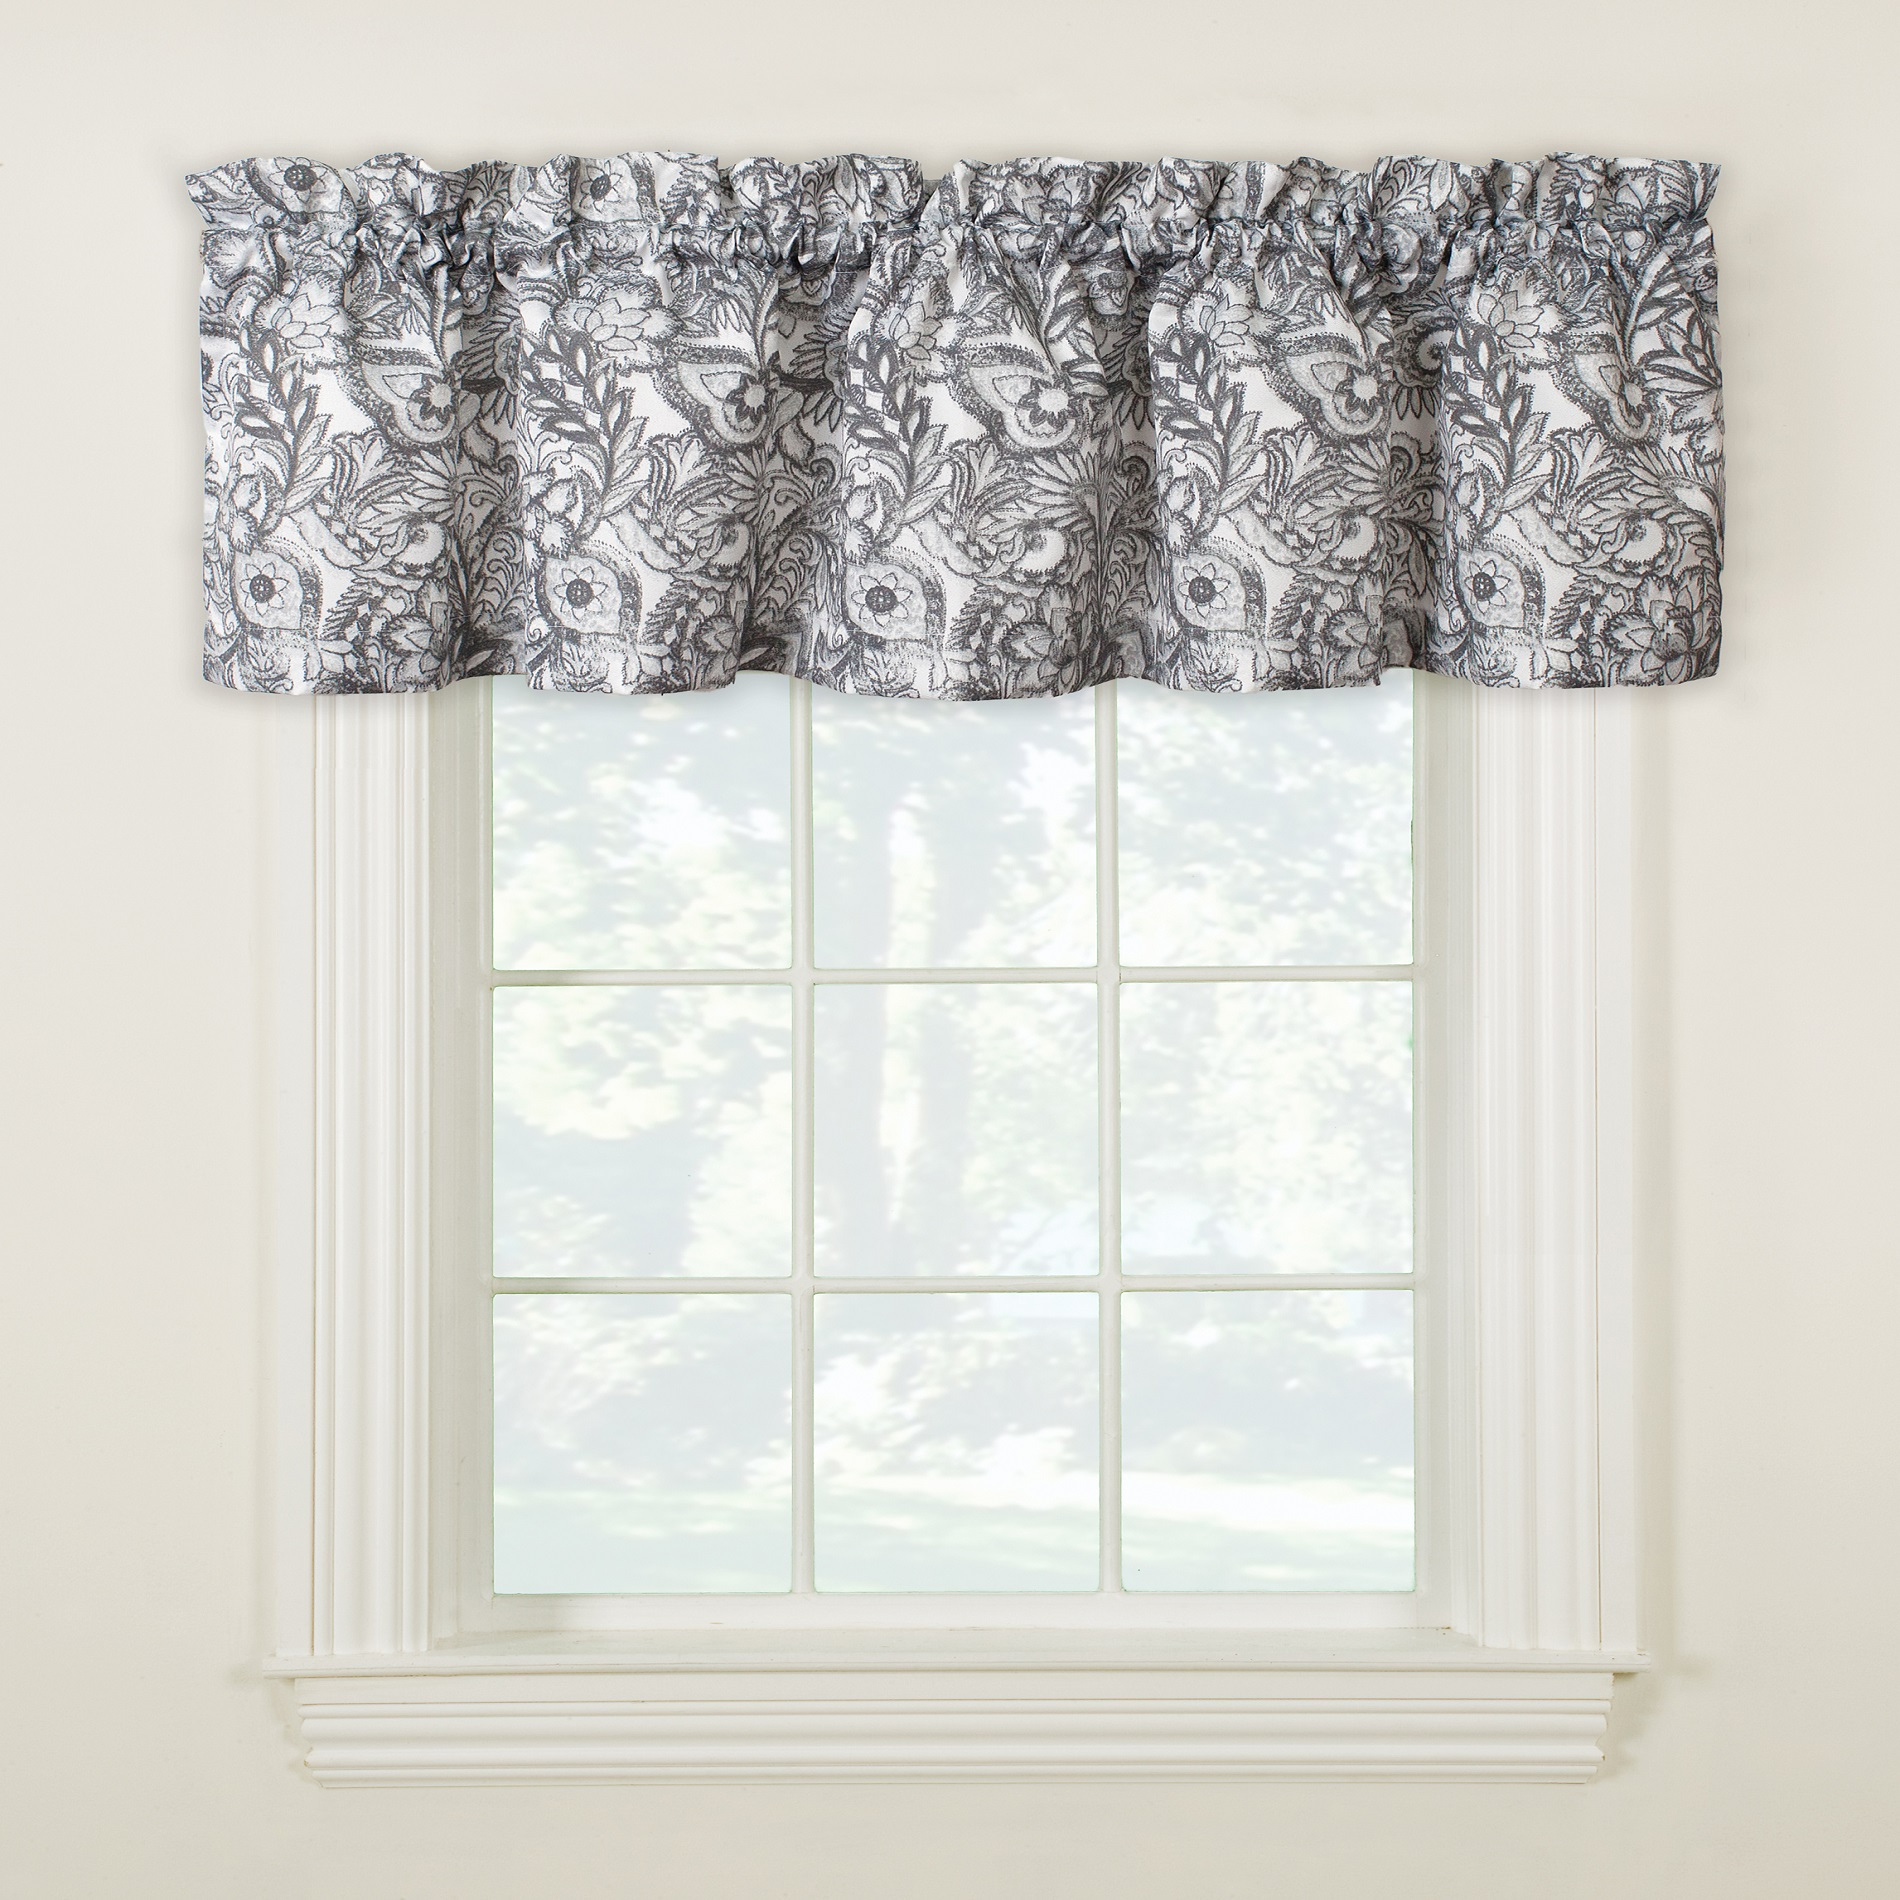 Essential Home Mix and Match Mayfield Printed Valance &#8211; 60&#8221; x 16&#8221;